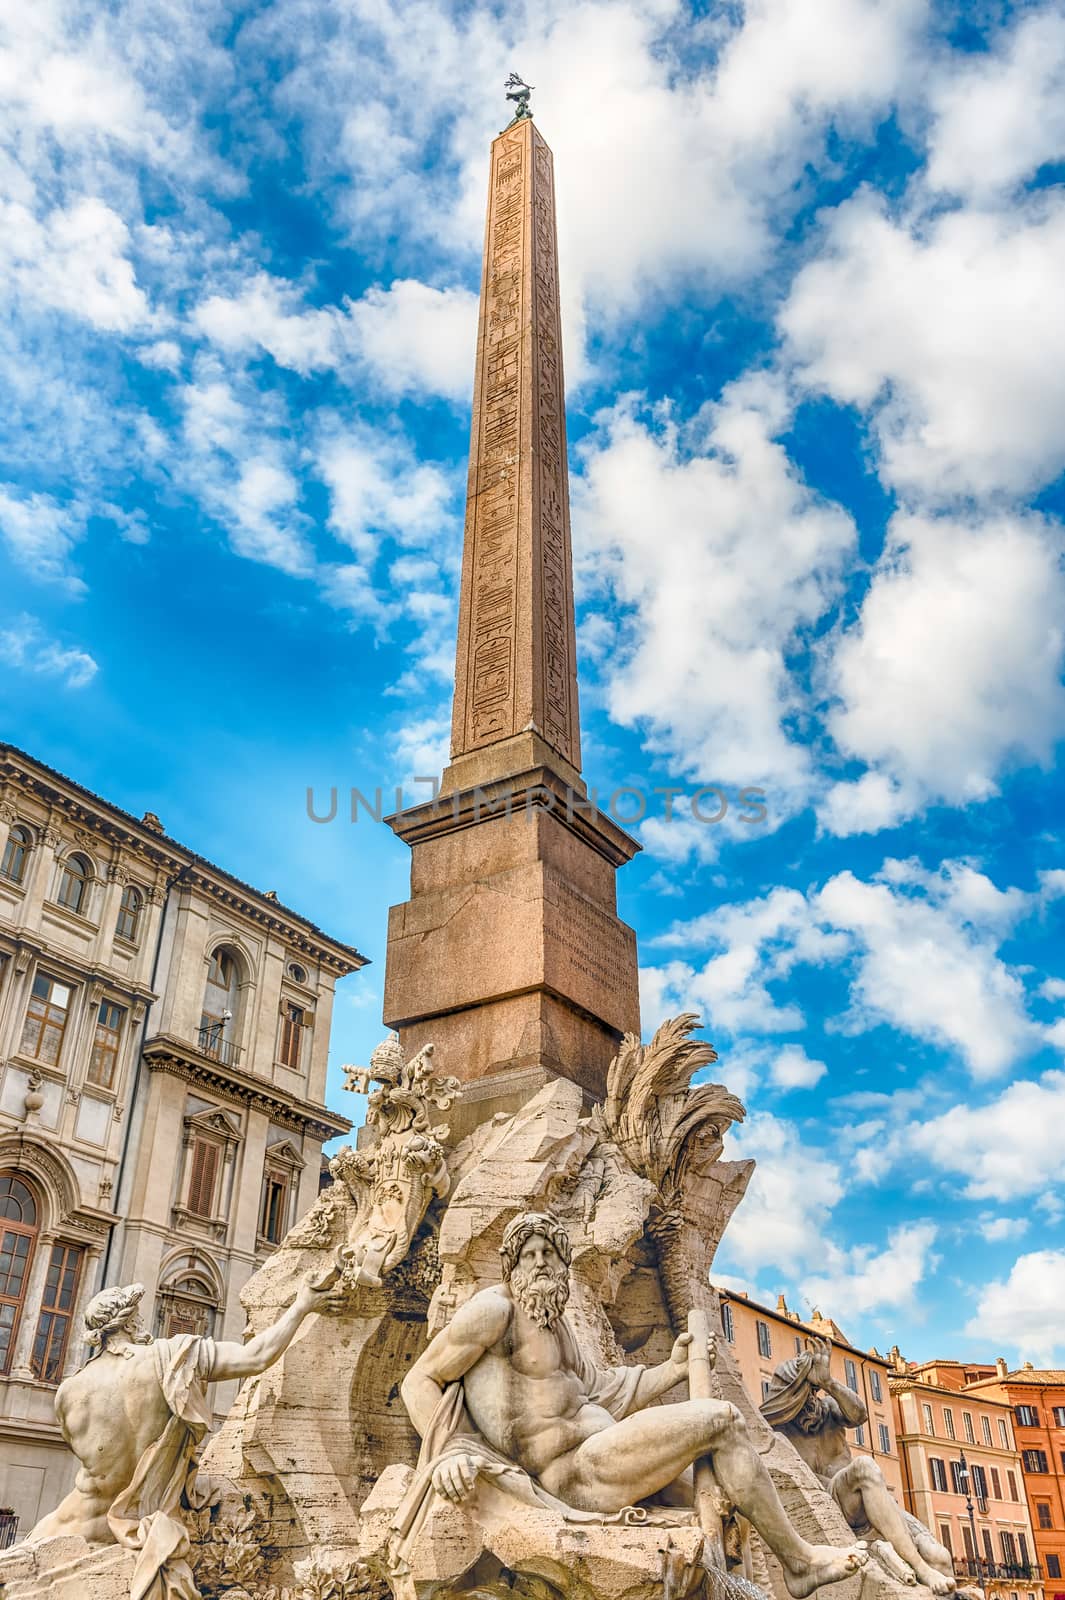 Obelisk and Fountain of the Four Rivers in Rome, Italy by marcorubino